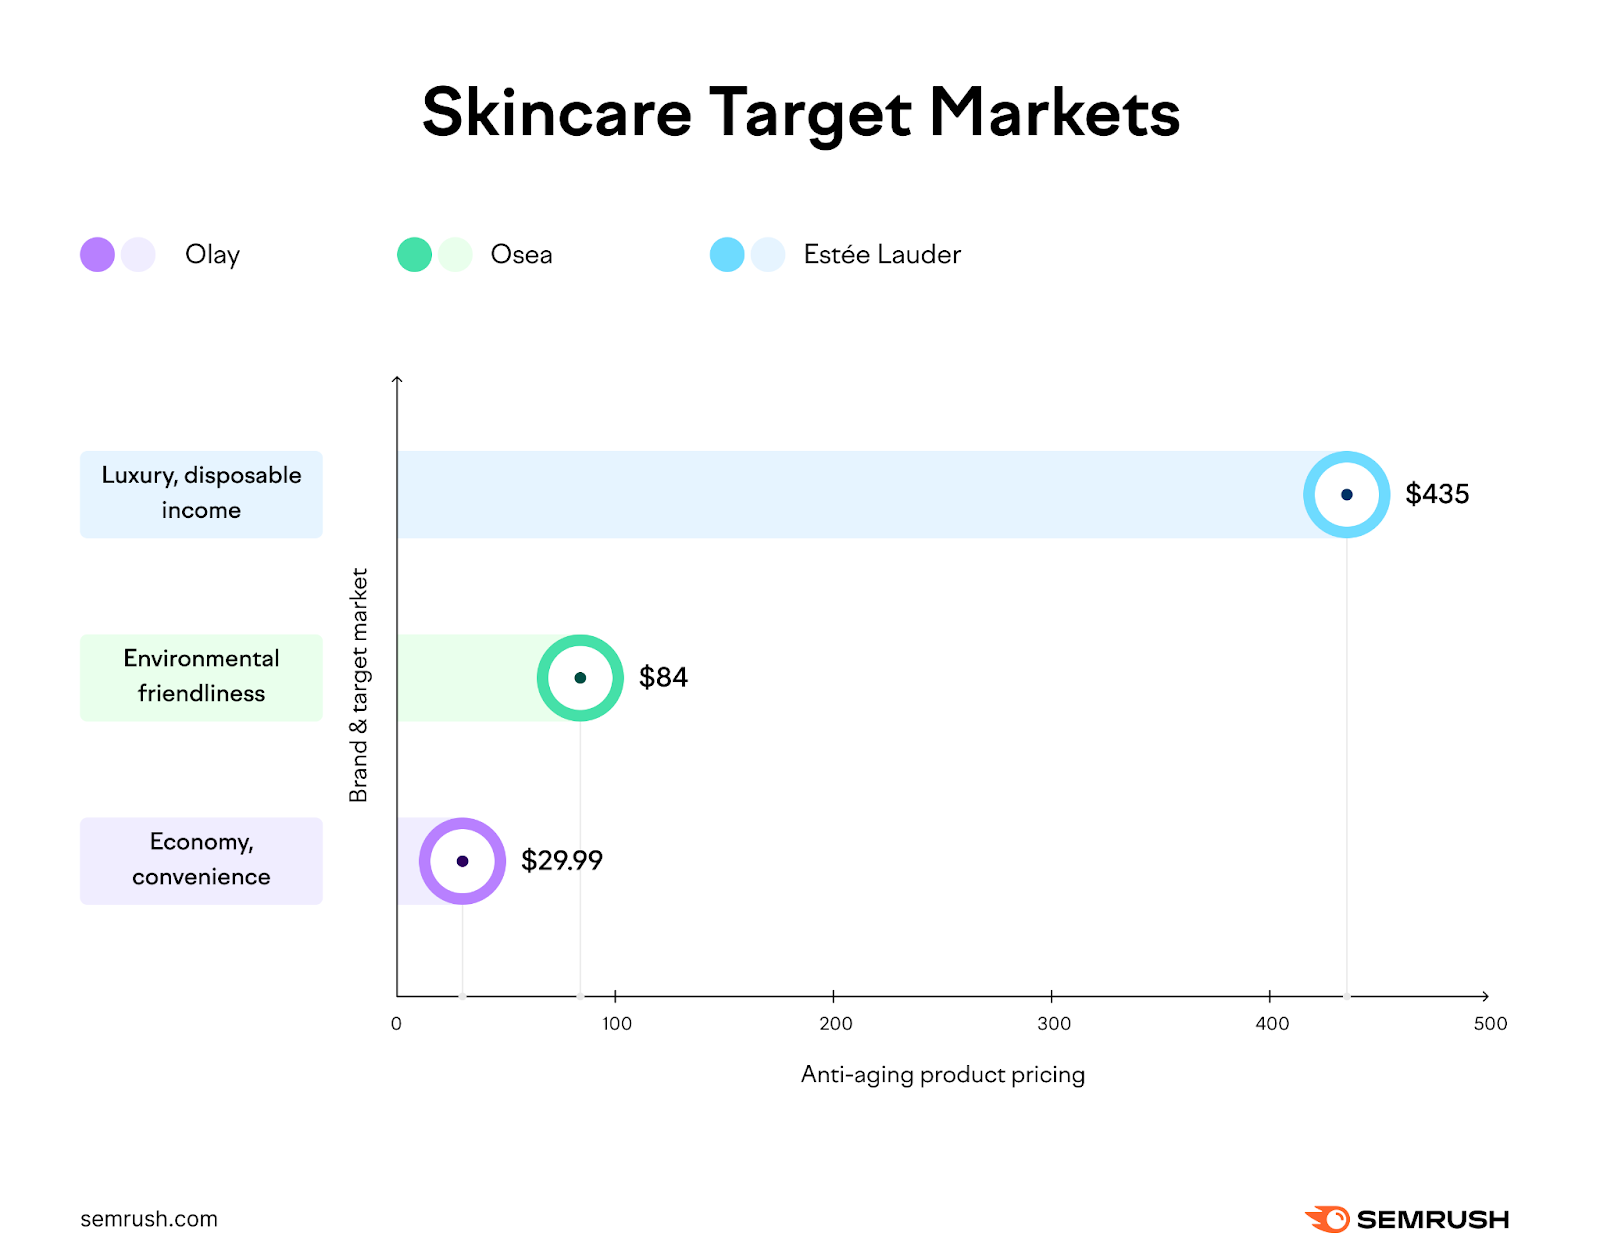 Skincare people     markets infographic, showing merchandise  pricing for Estée Lauder, OSEA, and Olay